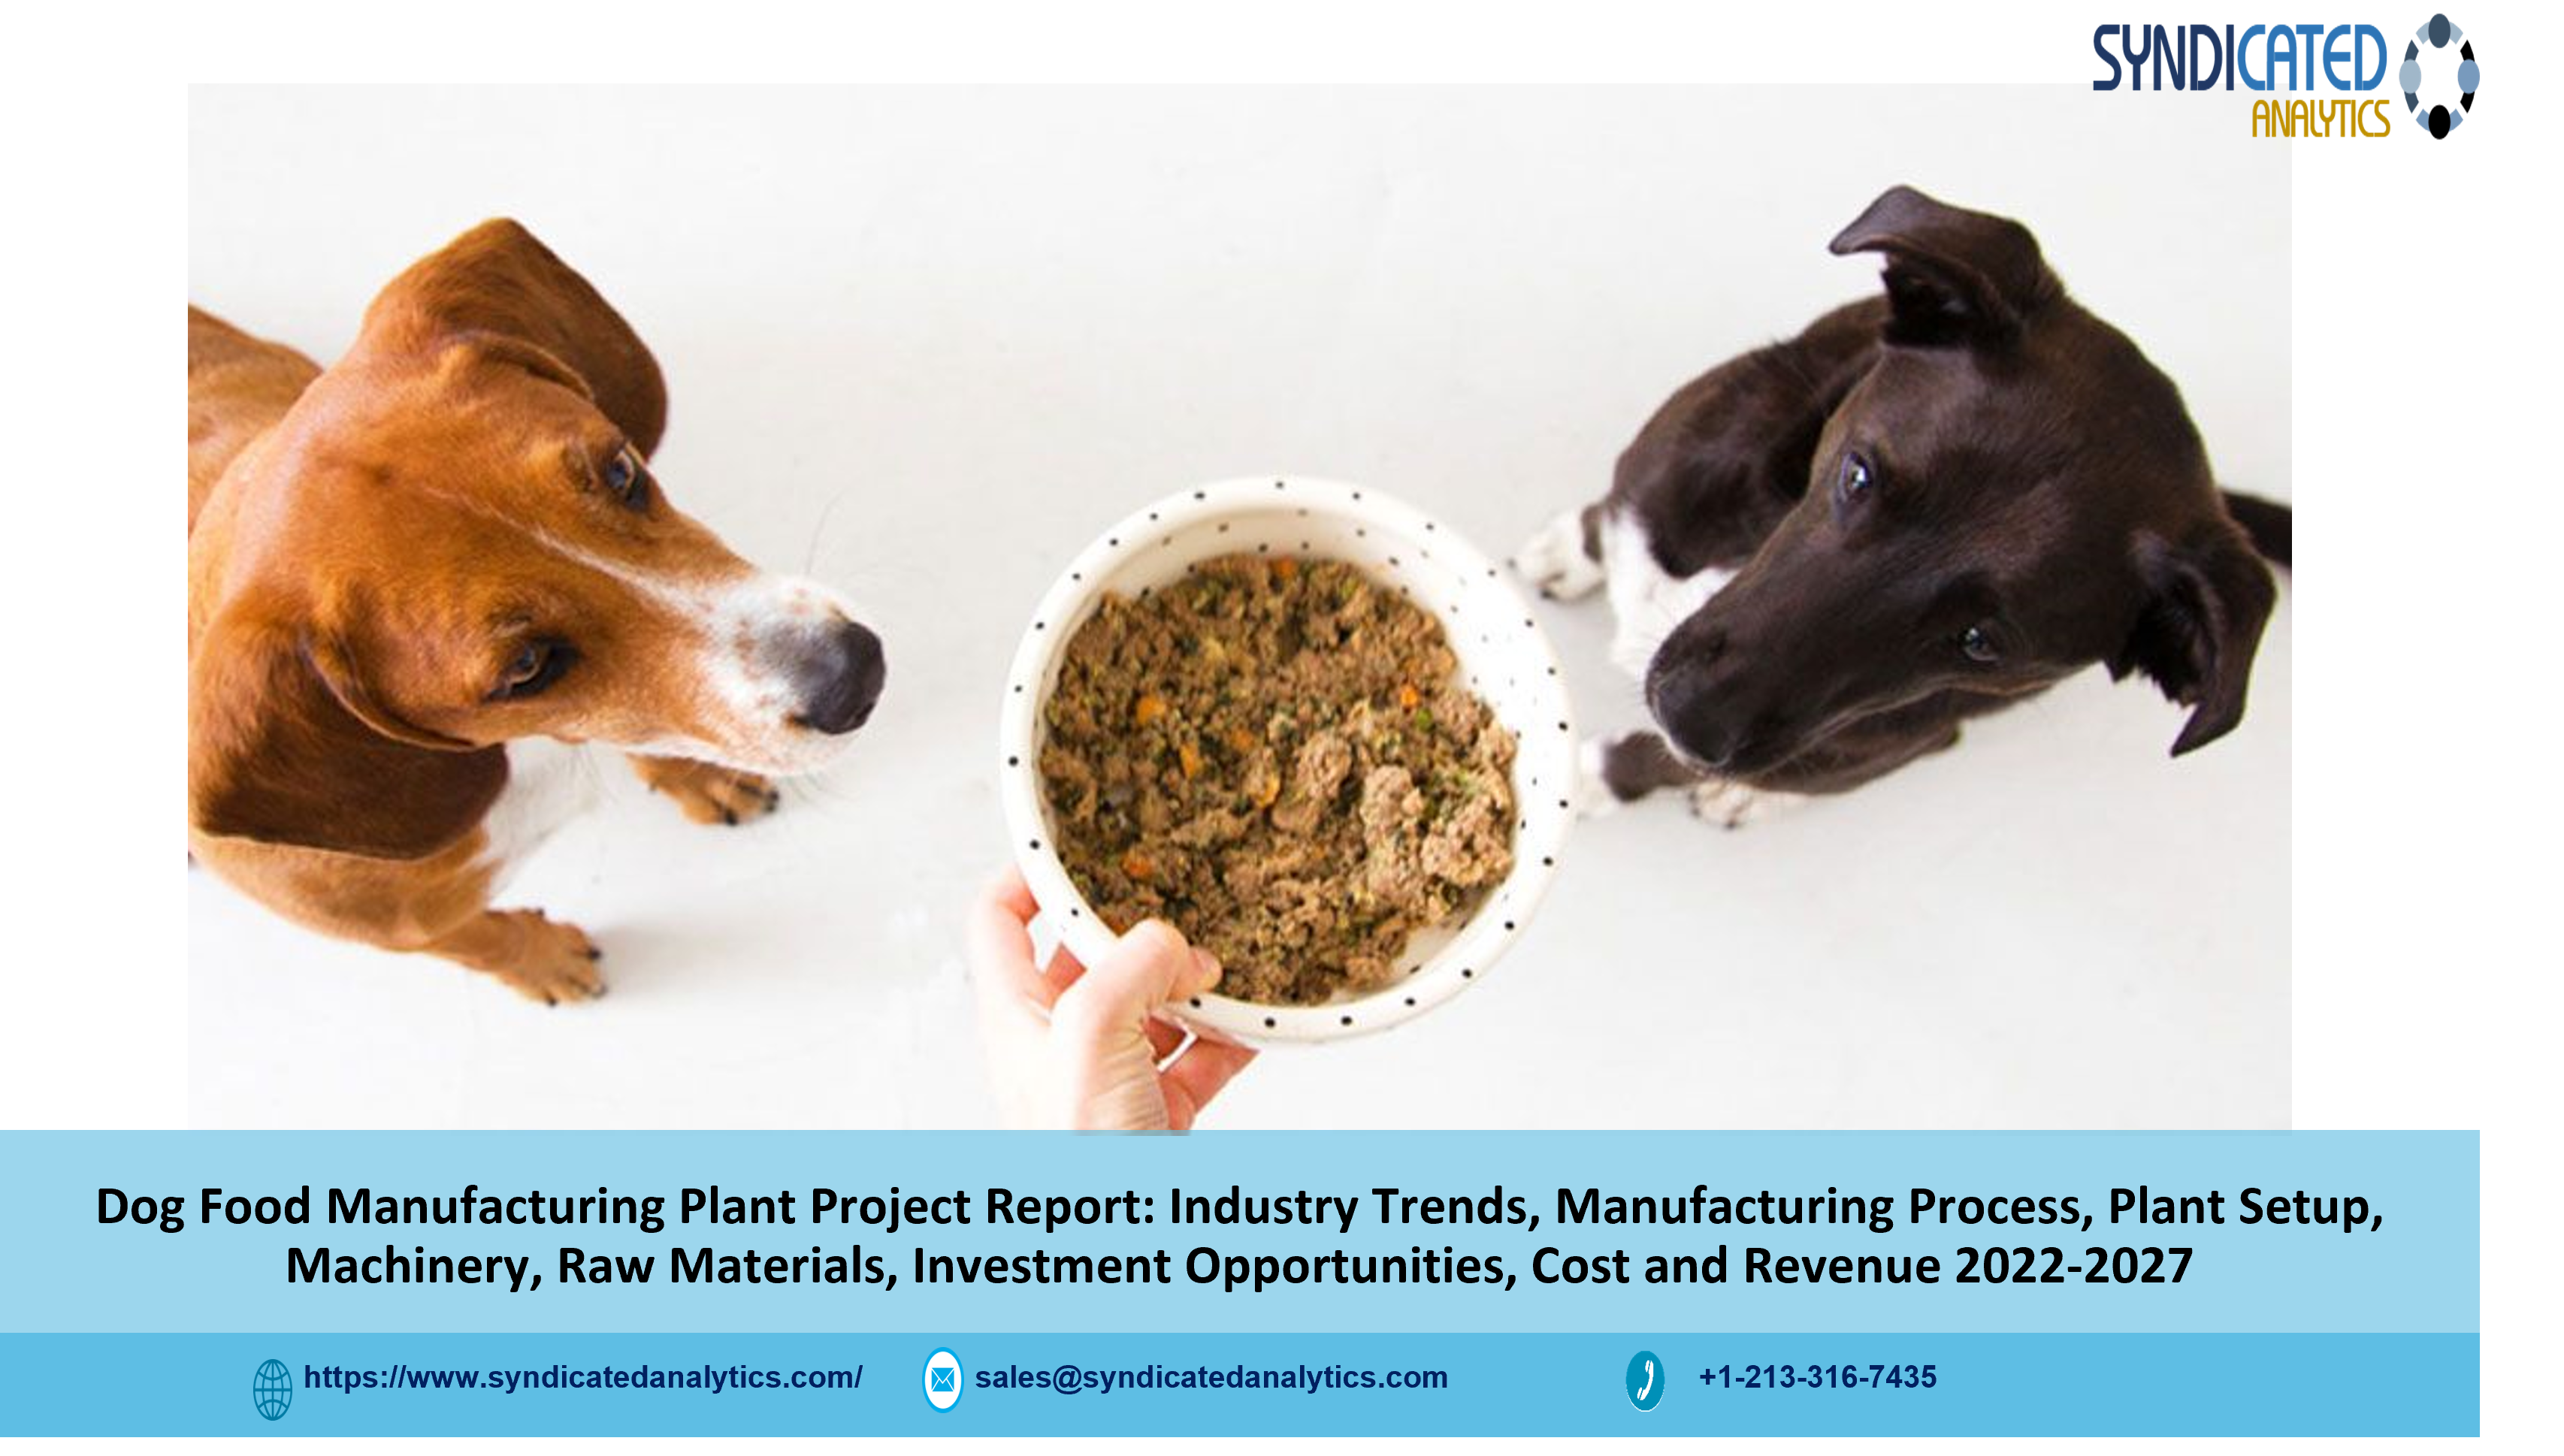 Project Report on Dog Food Manufacturing Plant